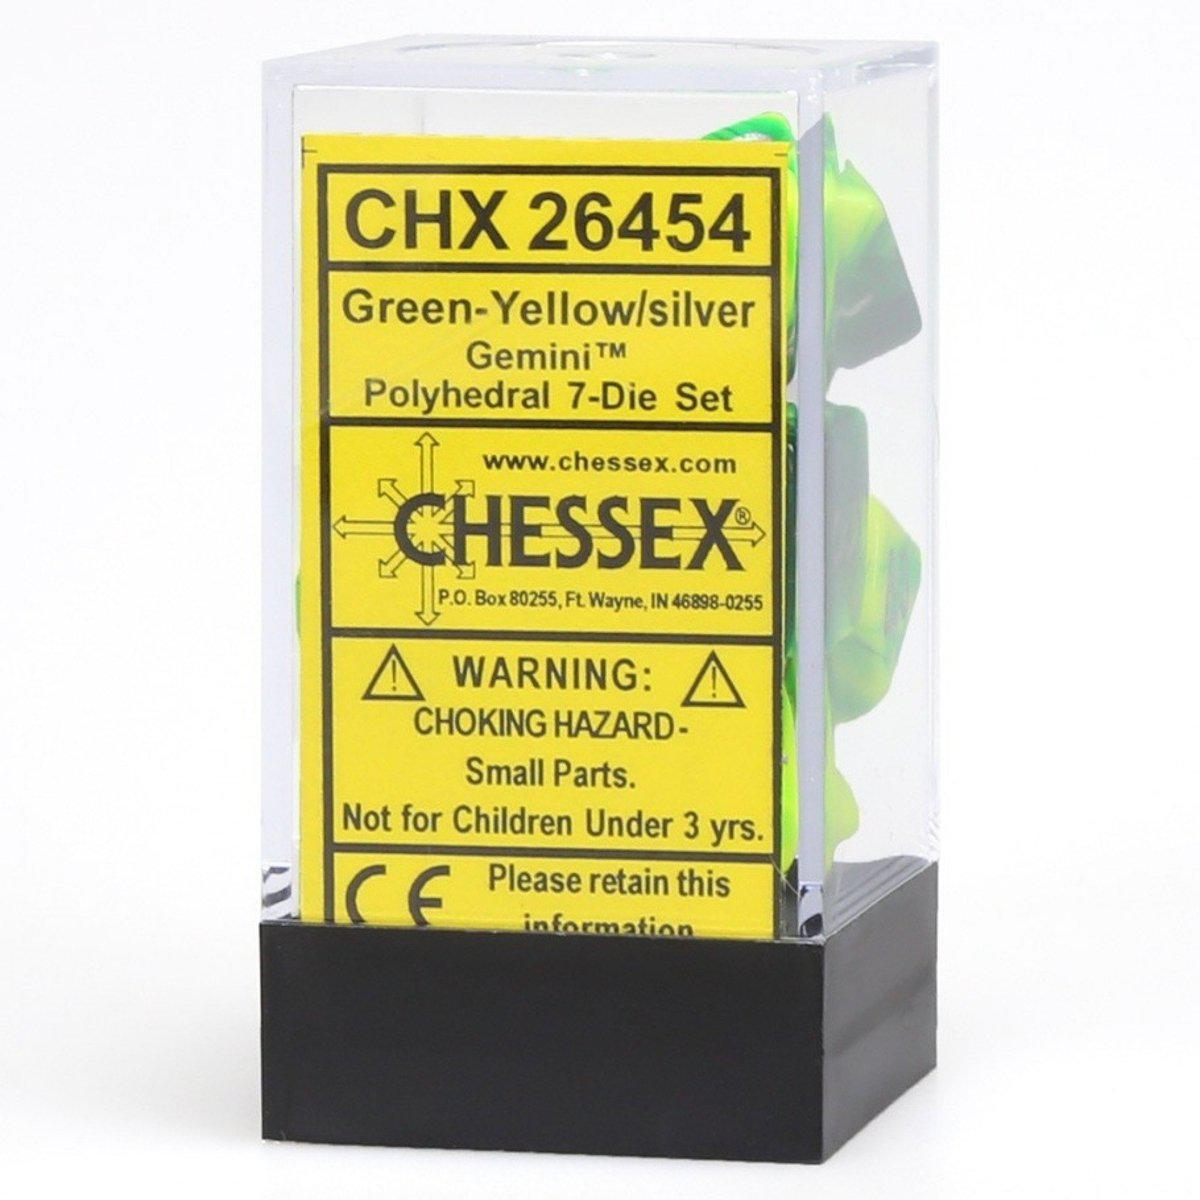 Chessex Gemini™ Polyhedral 7pcs Dice (Green-Yellow/Silver) [CHX26454]-Chessex-Ace Cards &amp; Collectibles